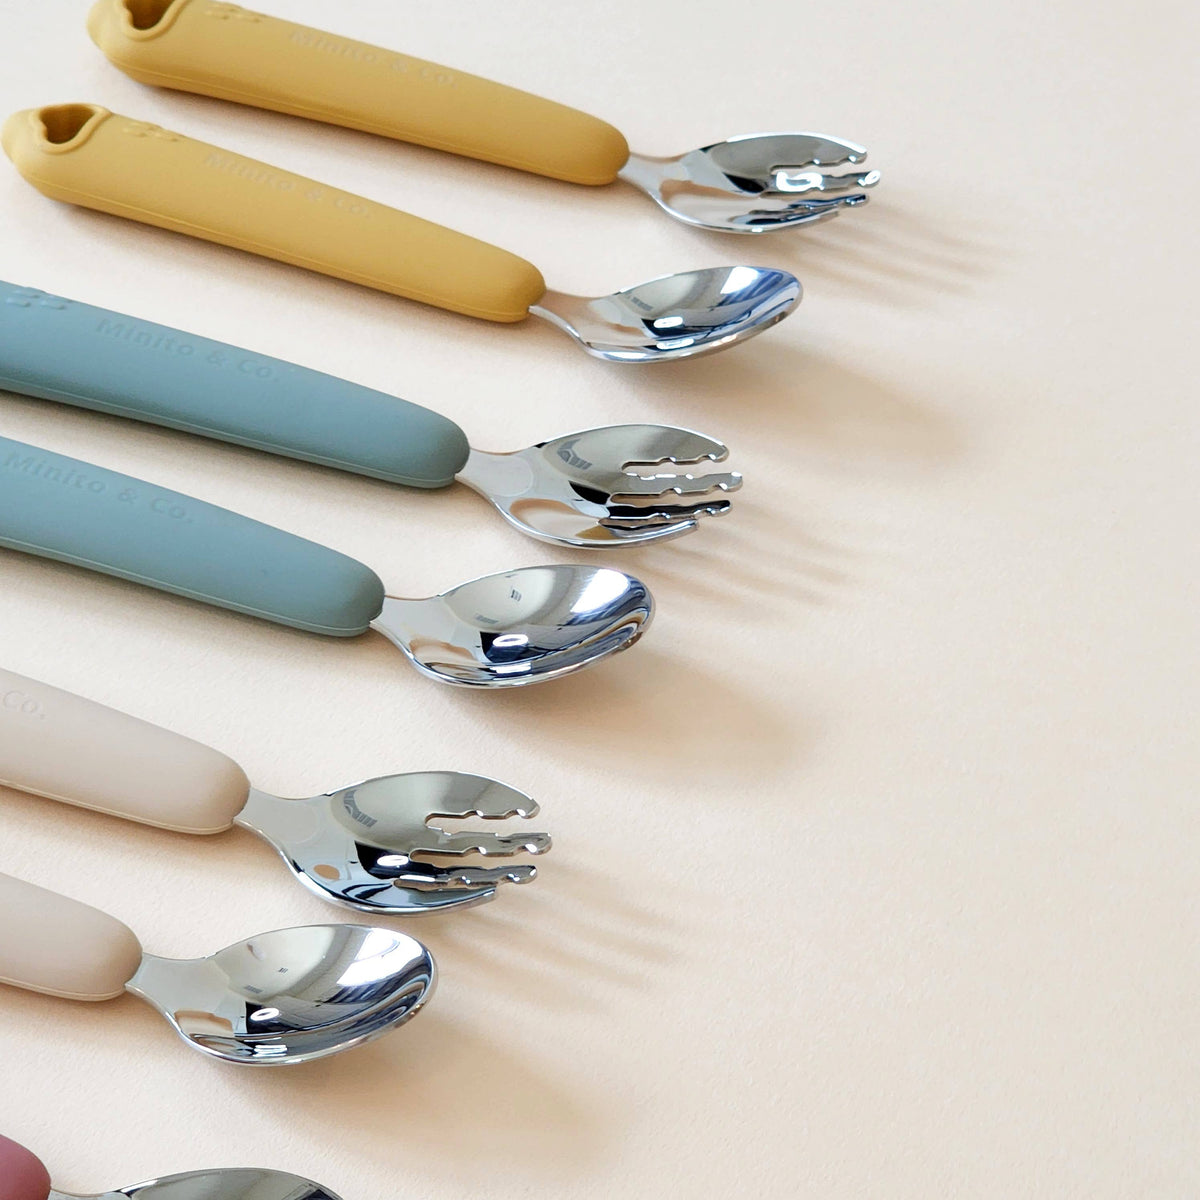 Silicone & Stainless Steel Utensils with Case Spoon & Fork